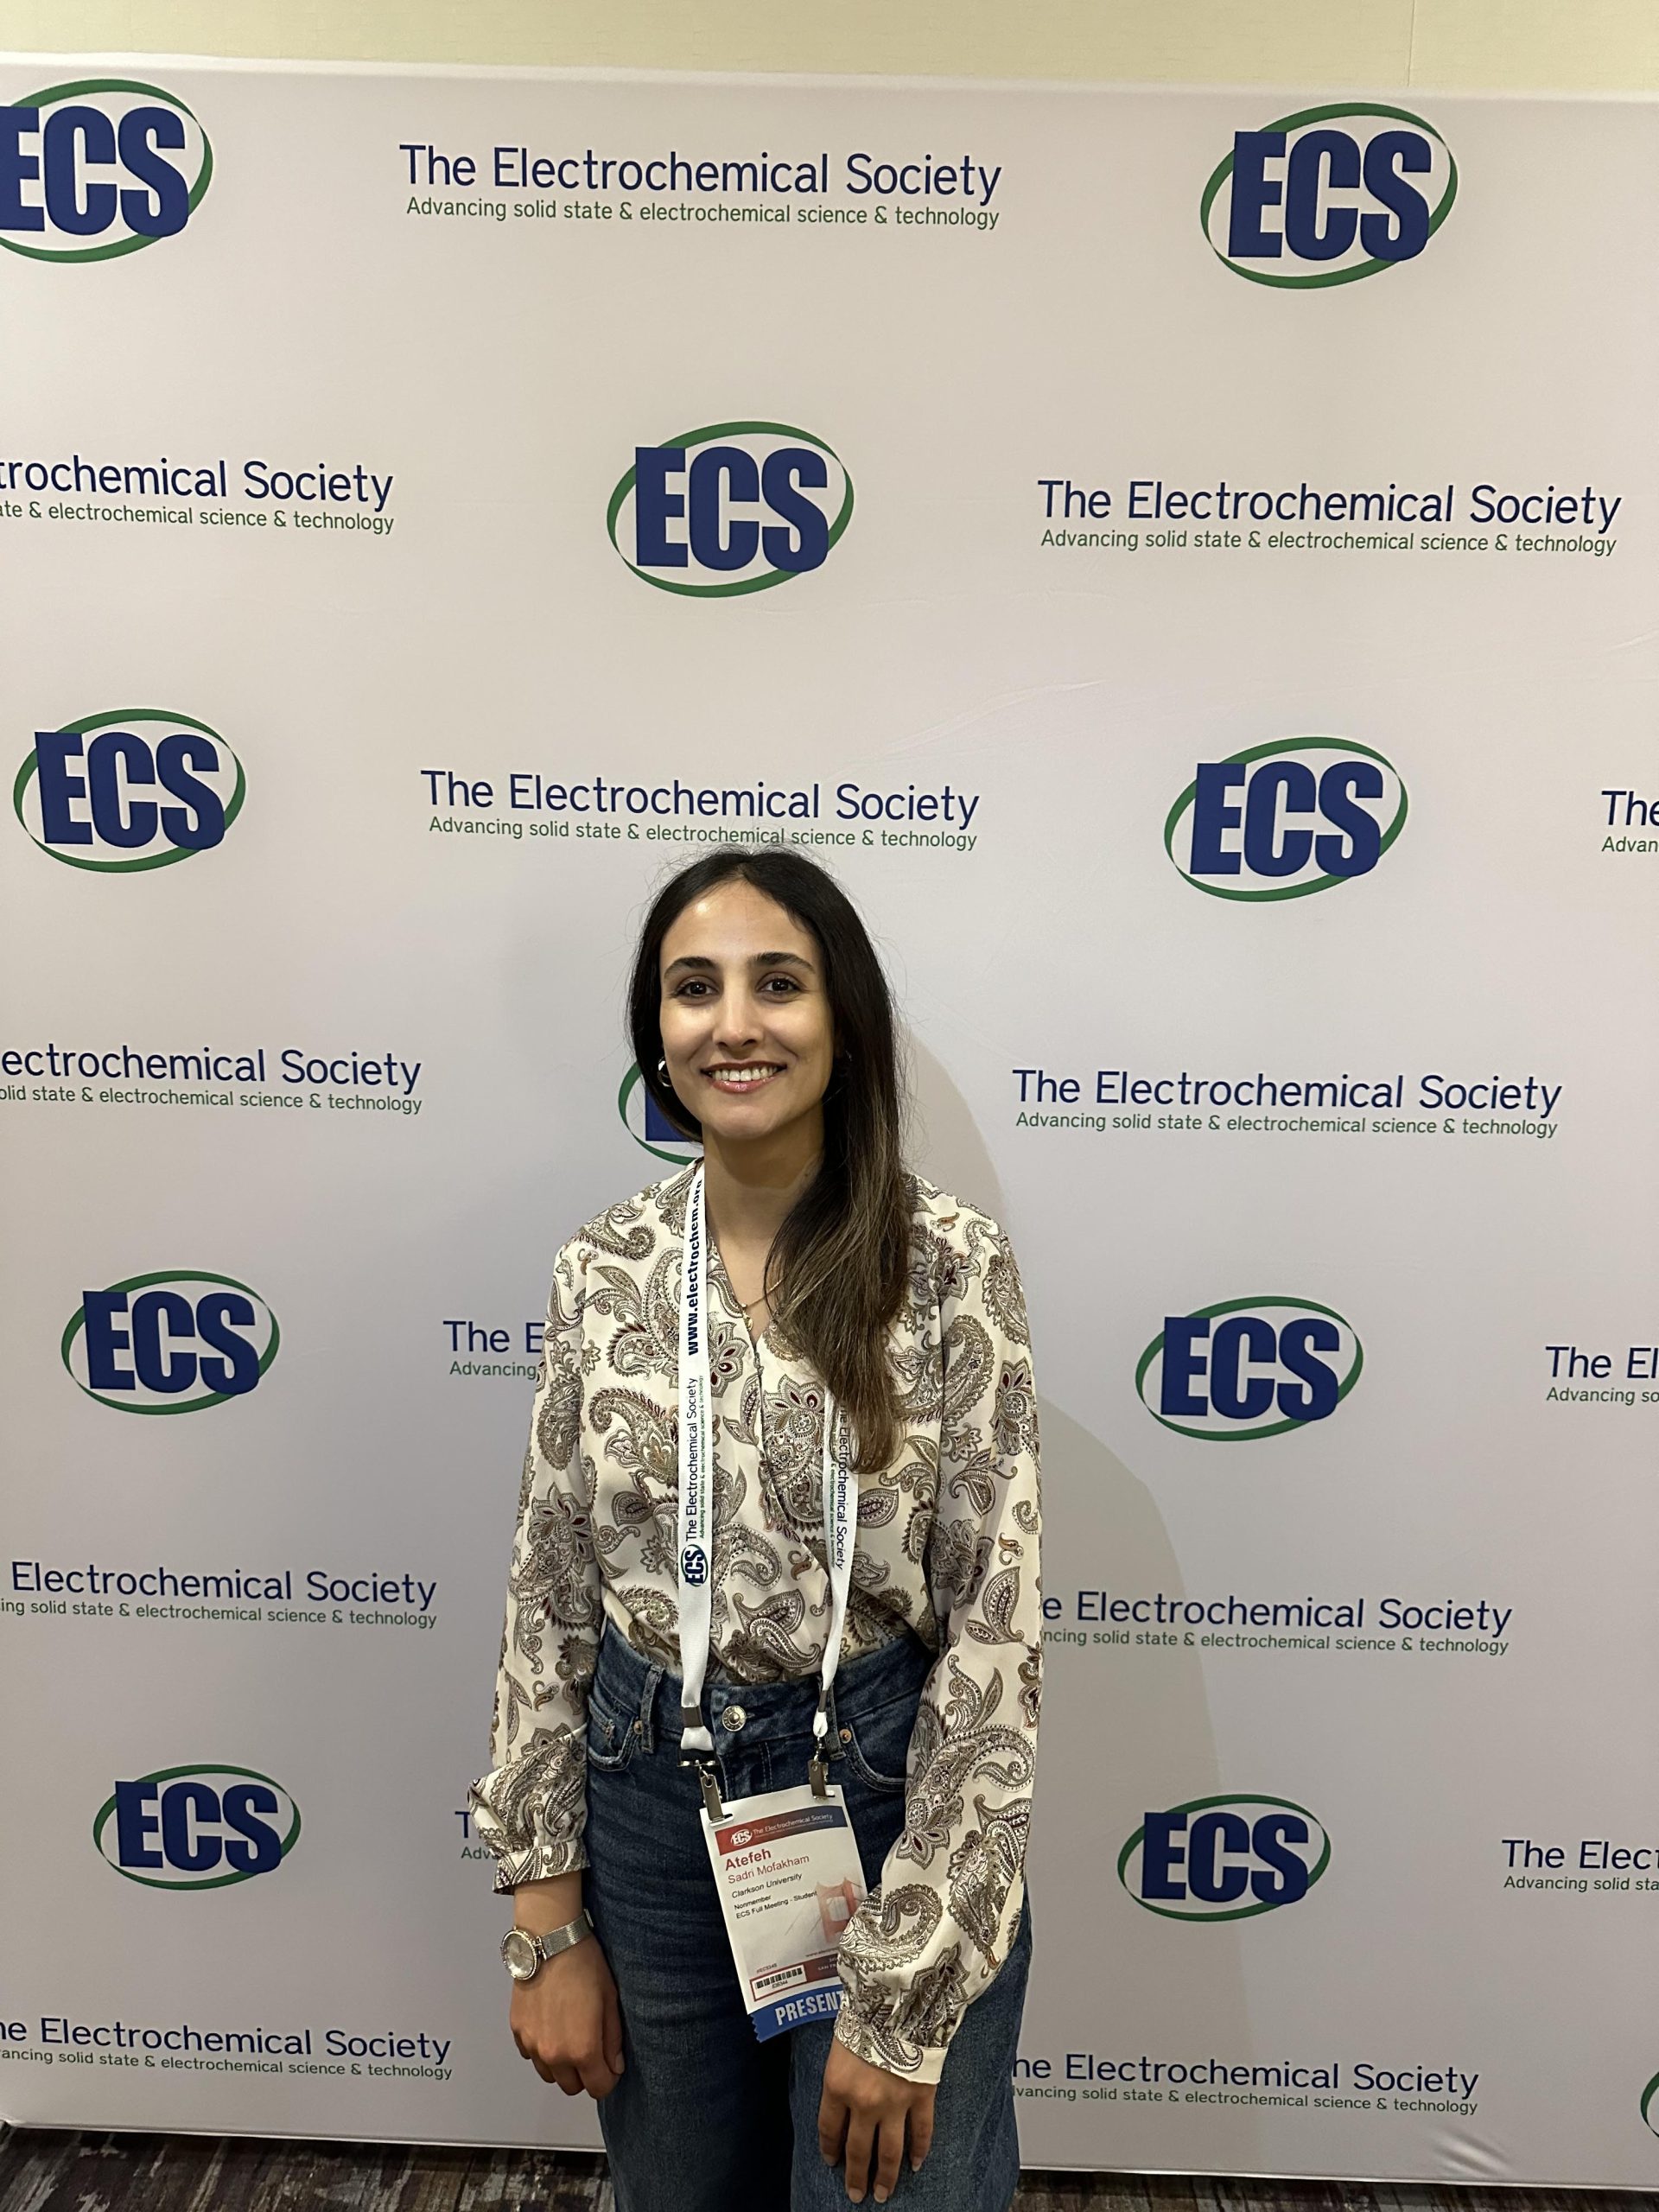 Atefeh Sadri Mofakham poses in front of a banner for The Electrochemical Society